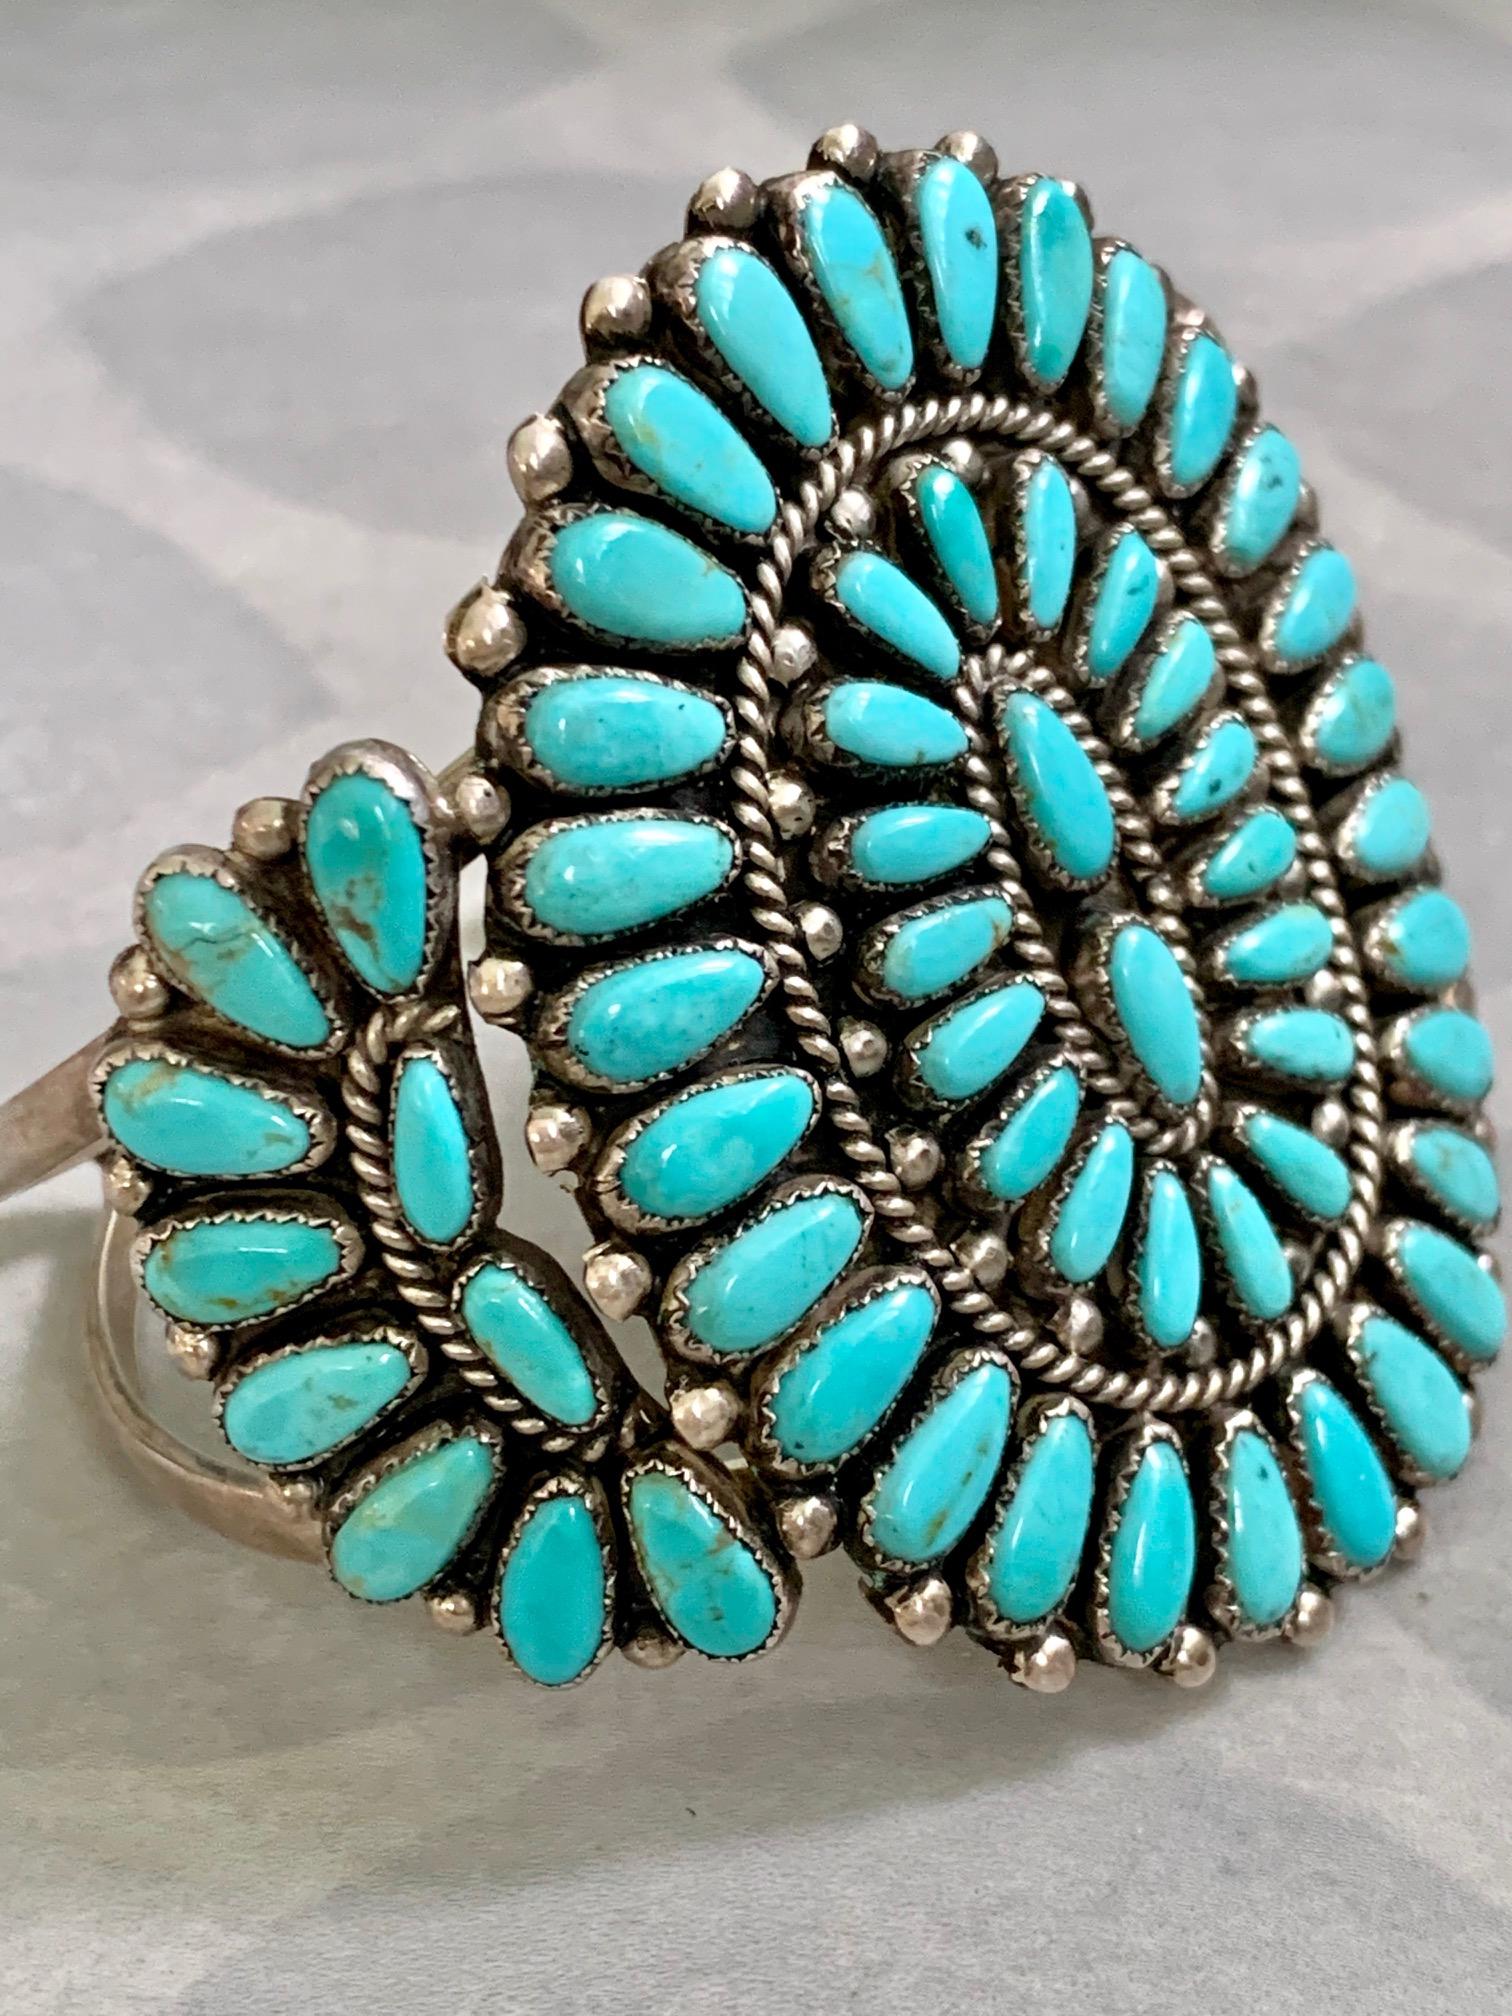 Cabochon Vintage Vernon C. Haskie Signed Navajo Native American Turquoise Silver Cuff